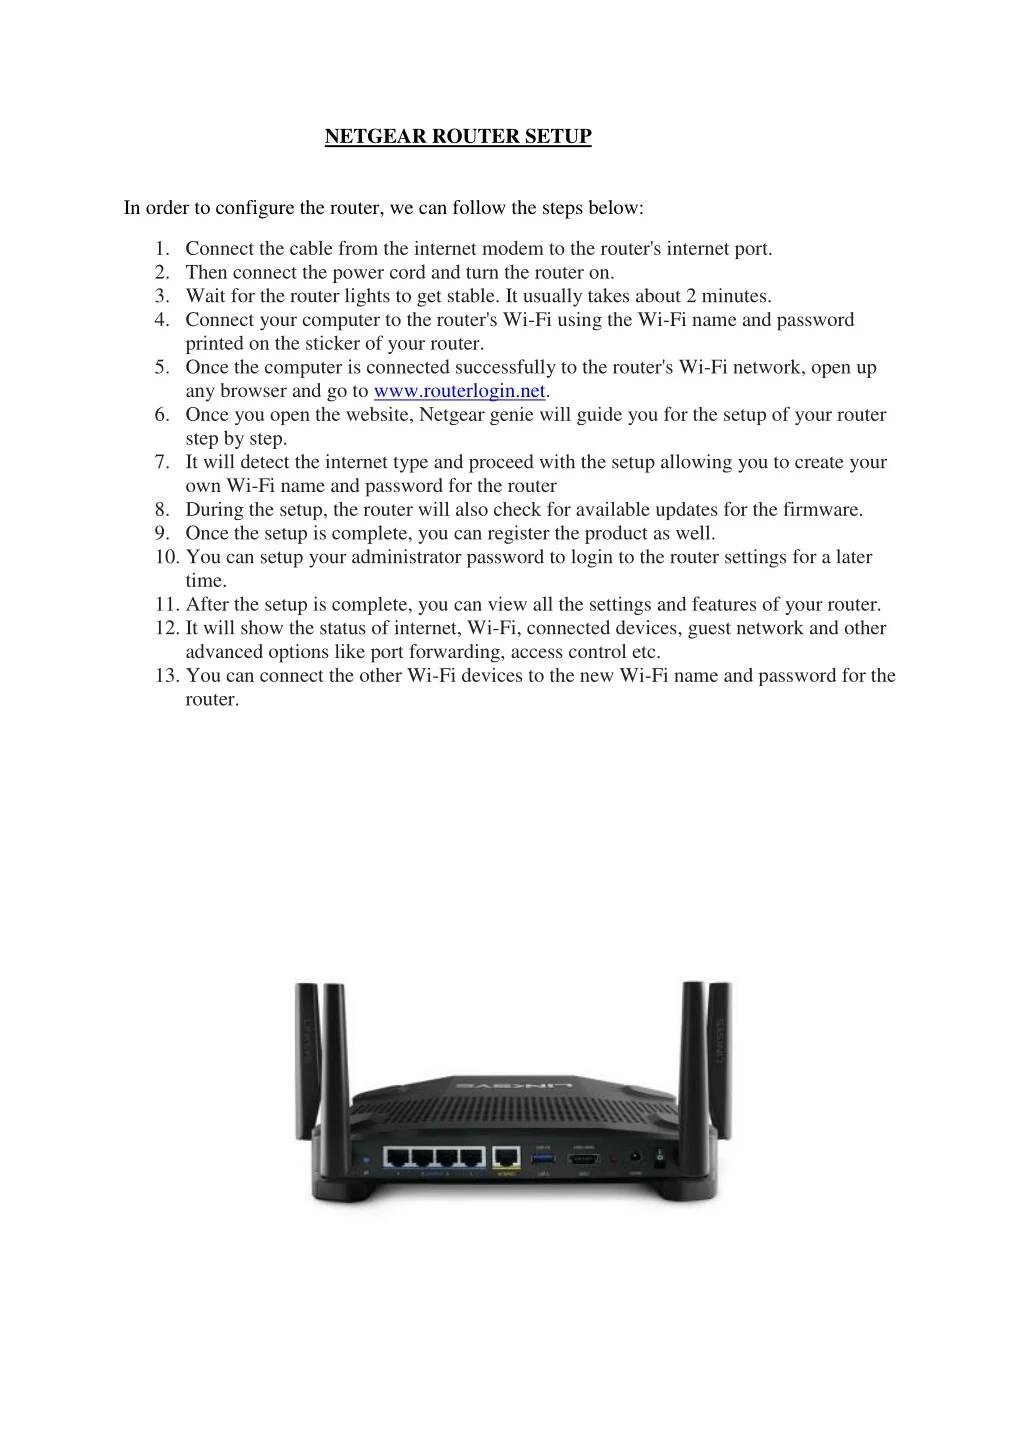 netgear router setup in order to configure